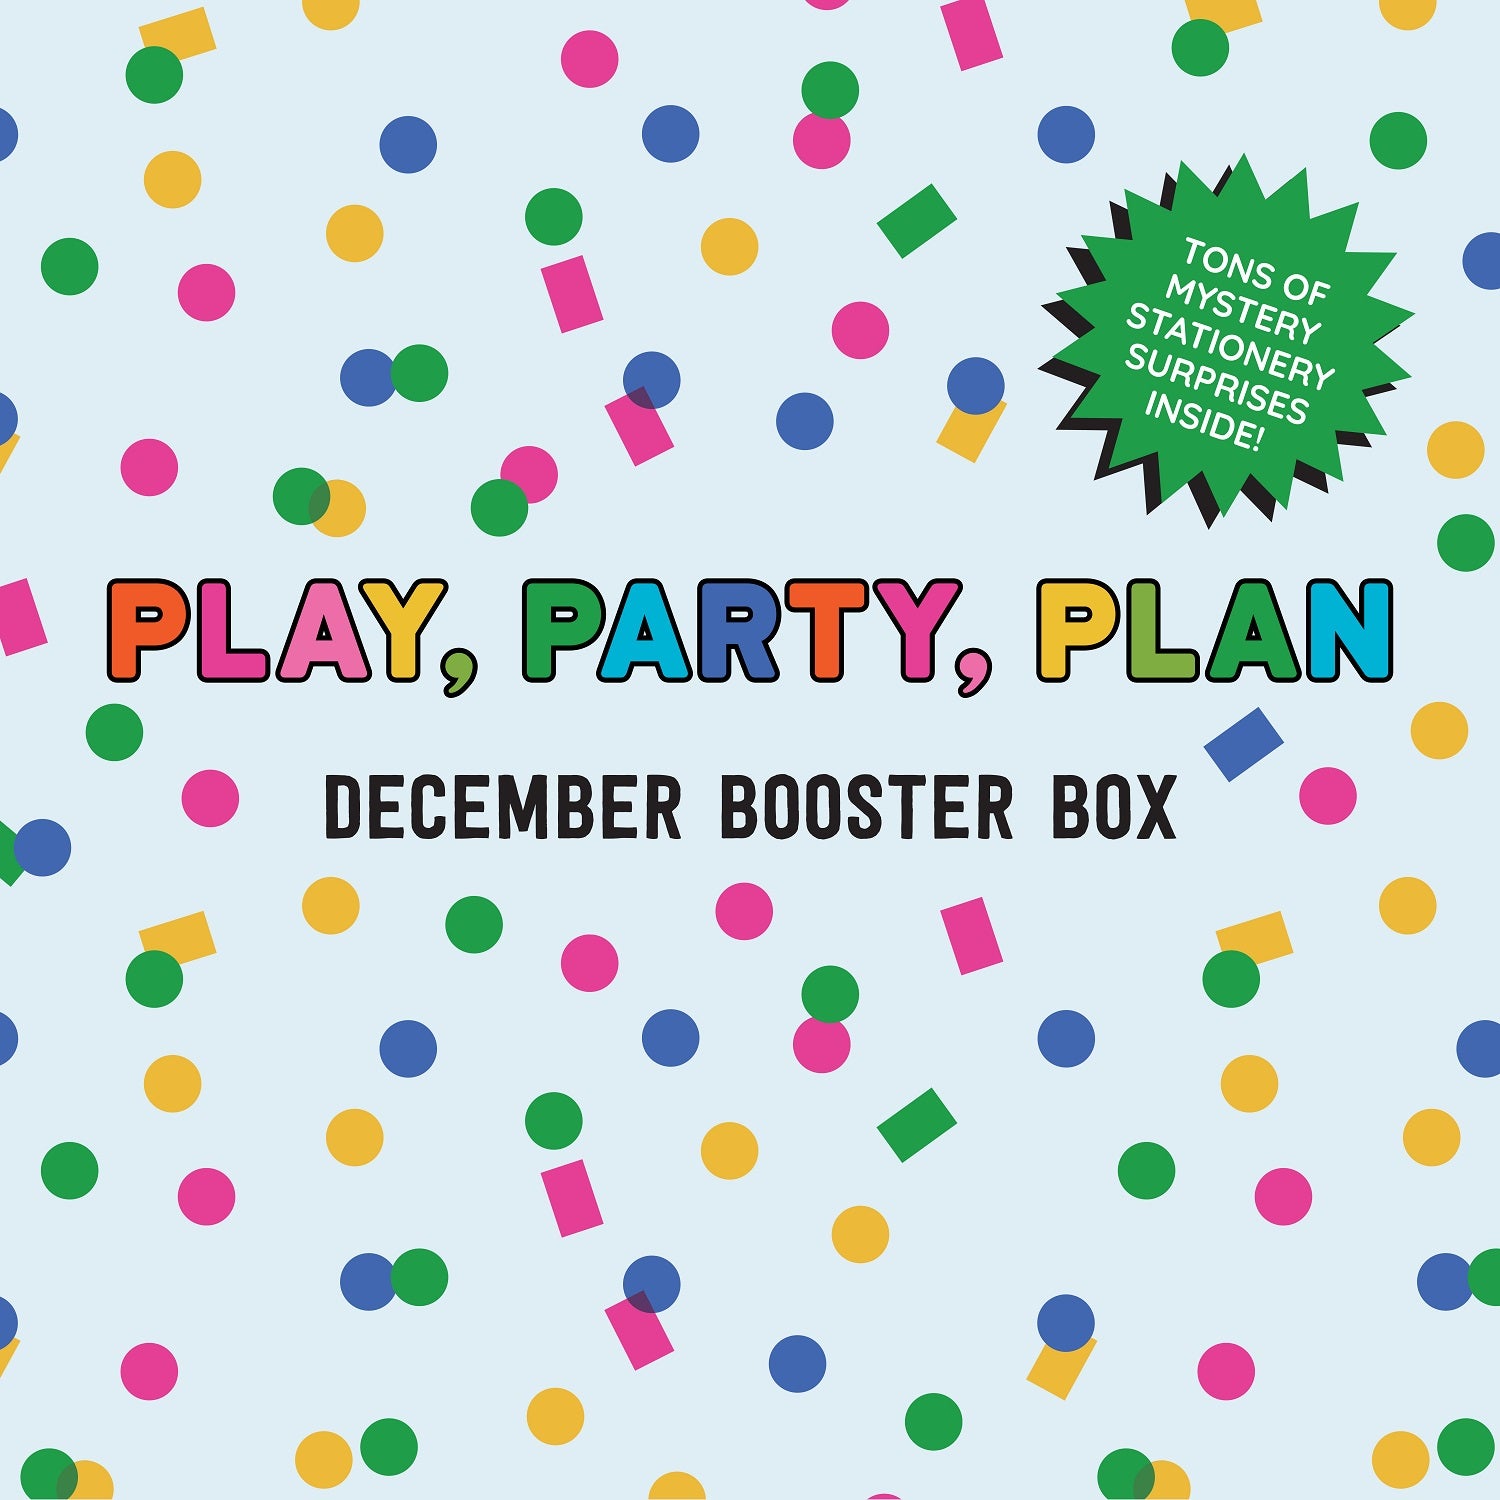 Play, Party, Plan Stationery Box